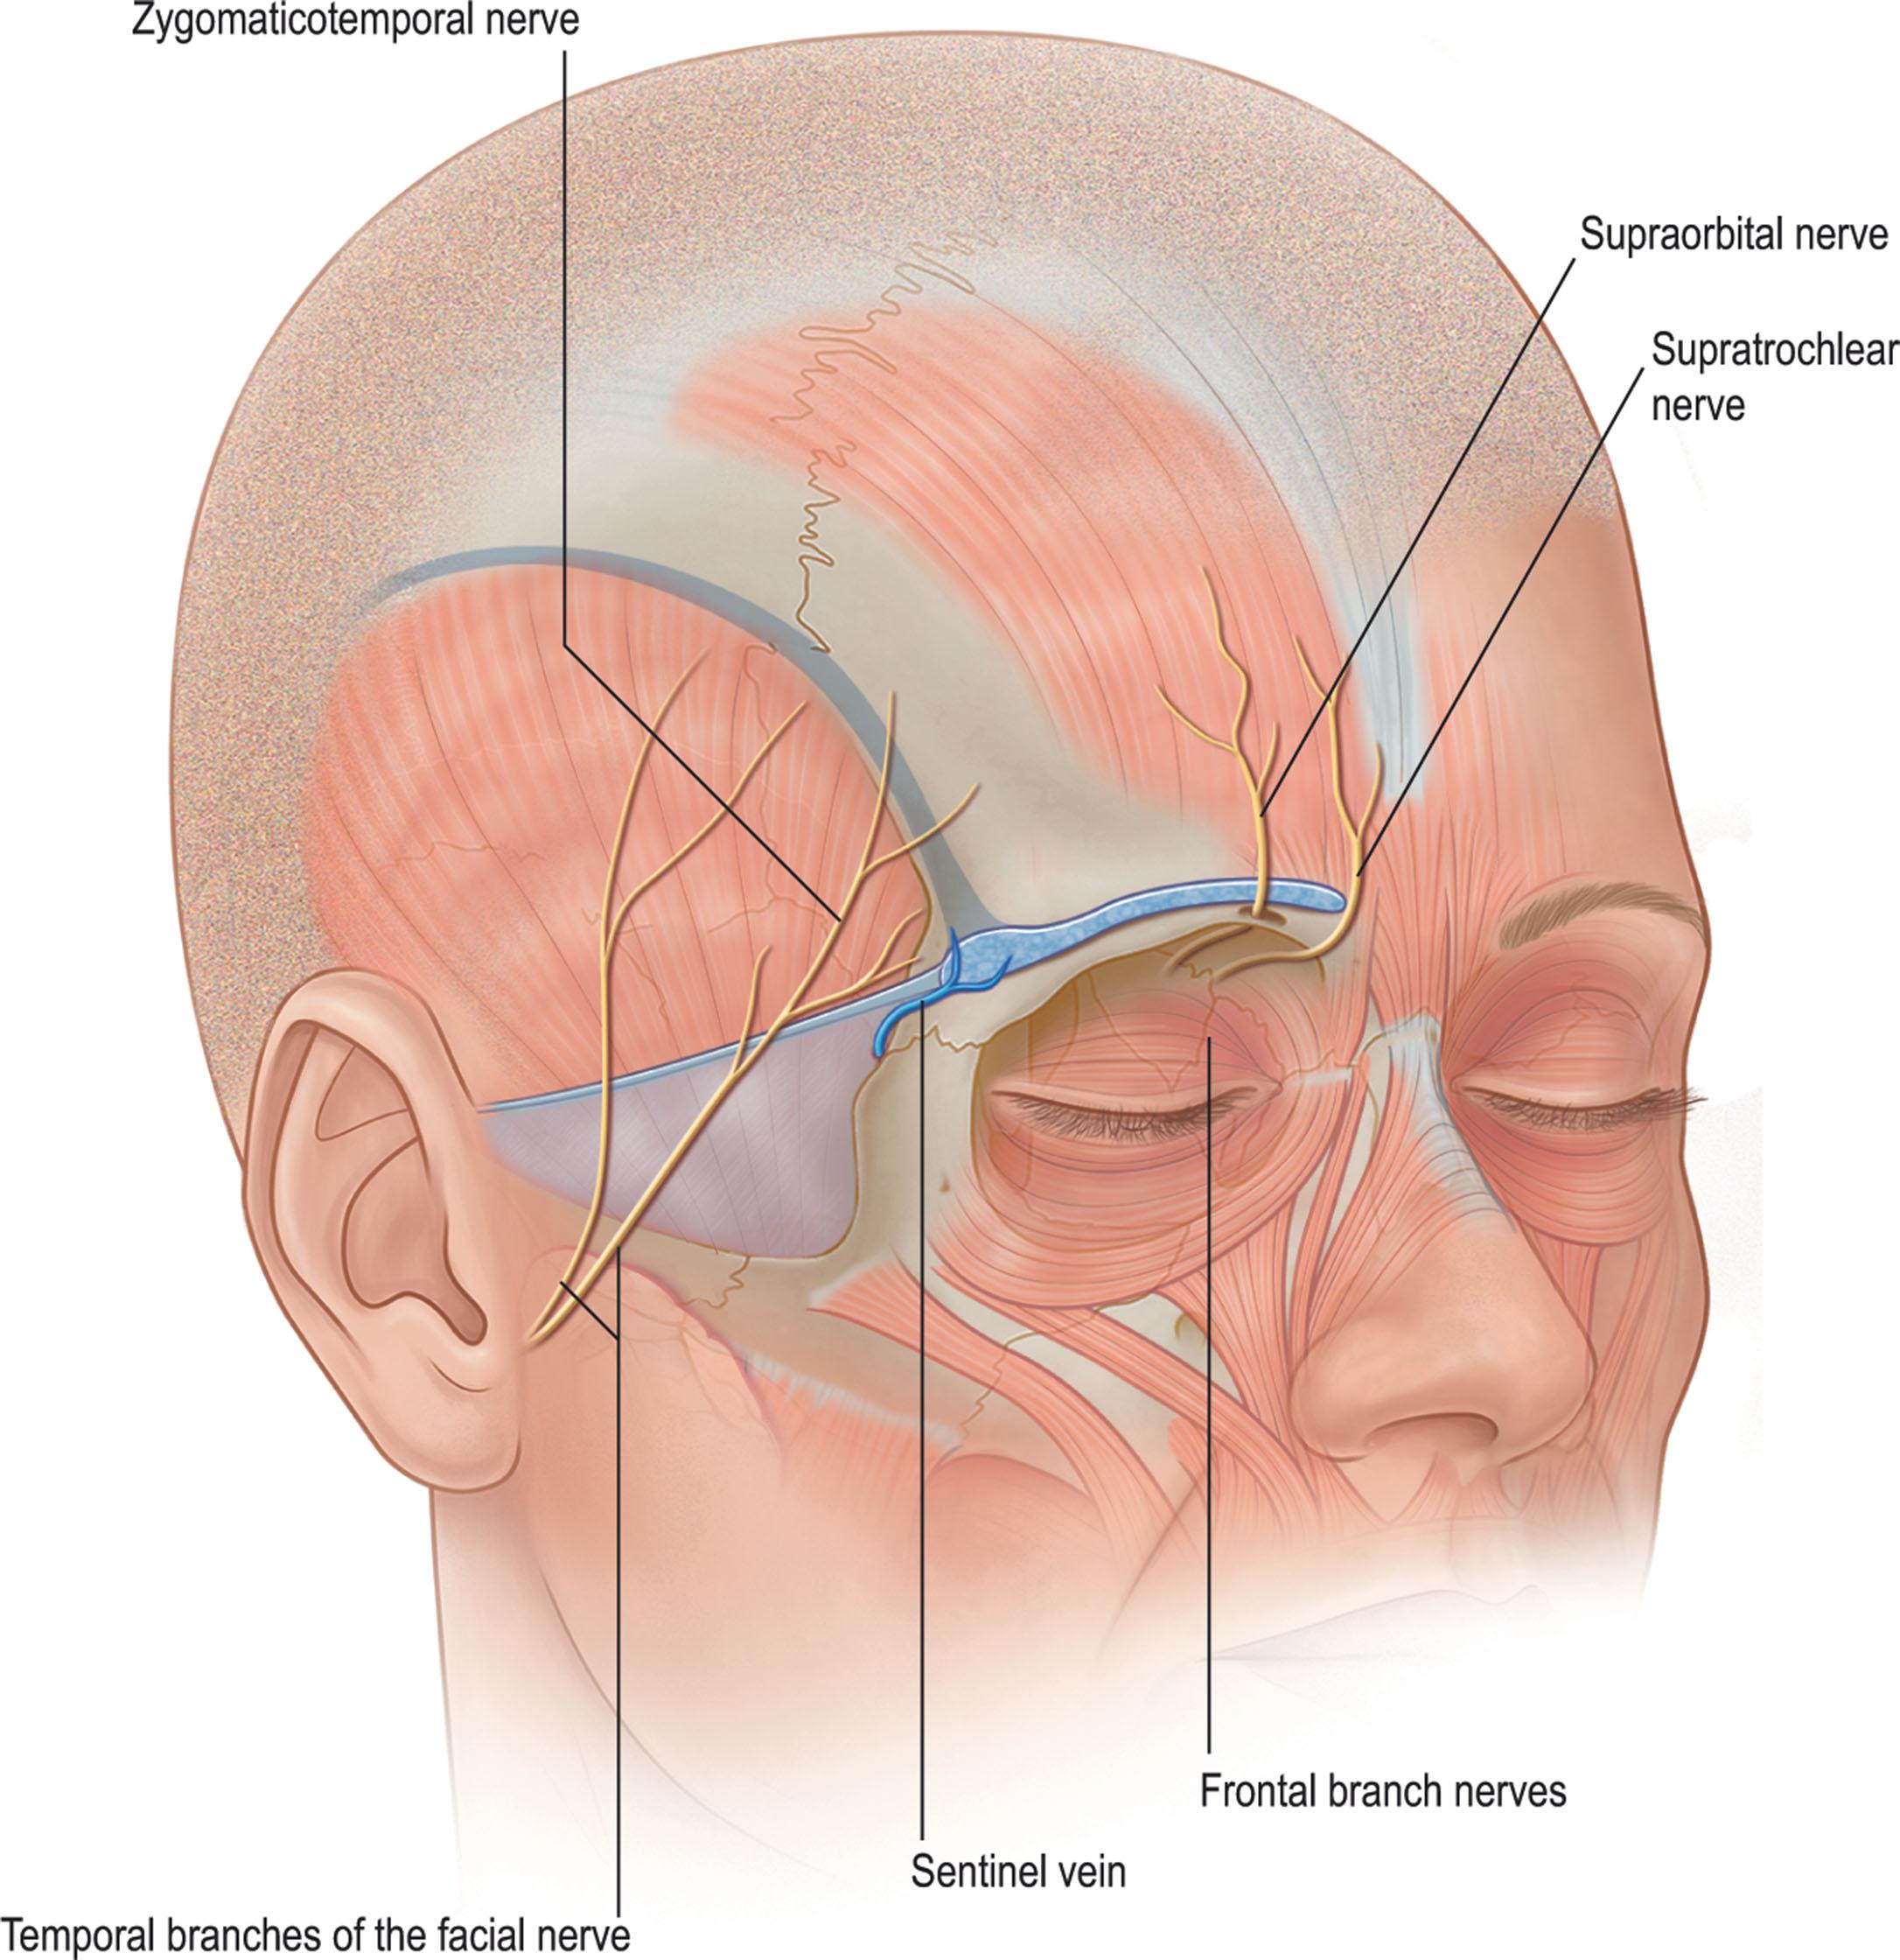 Figure 12.2, Sensory and motor nerve supply to the brow. The supraorbital and supratrochlear nerves are protected during dissection. The frontal branches of the facial nerve lie anterior to the deep temporal fascia.